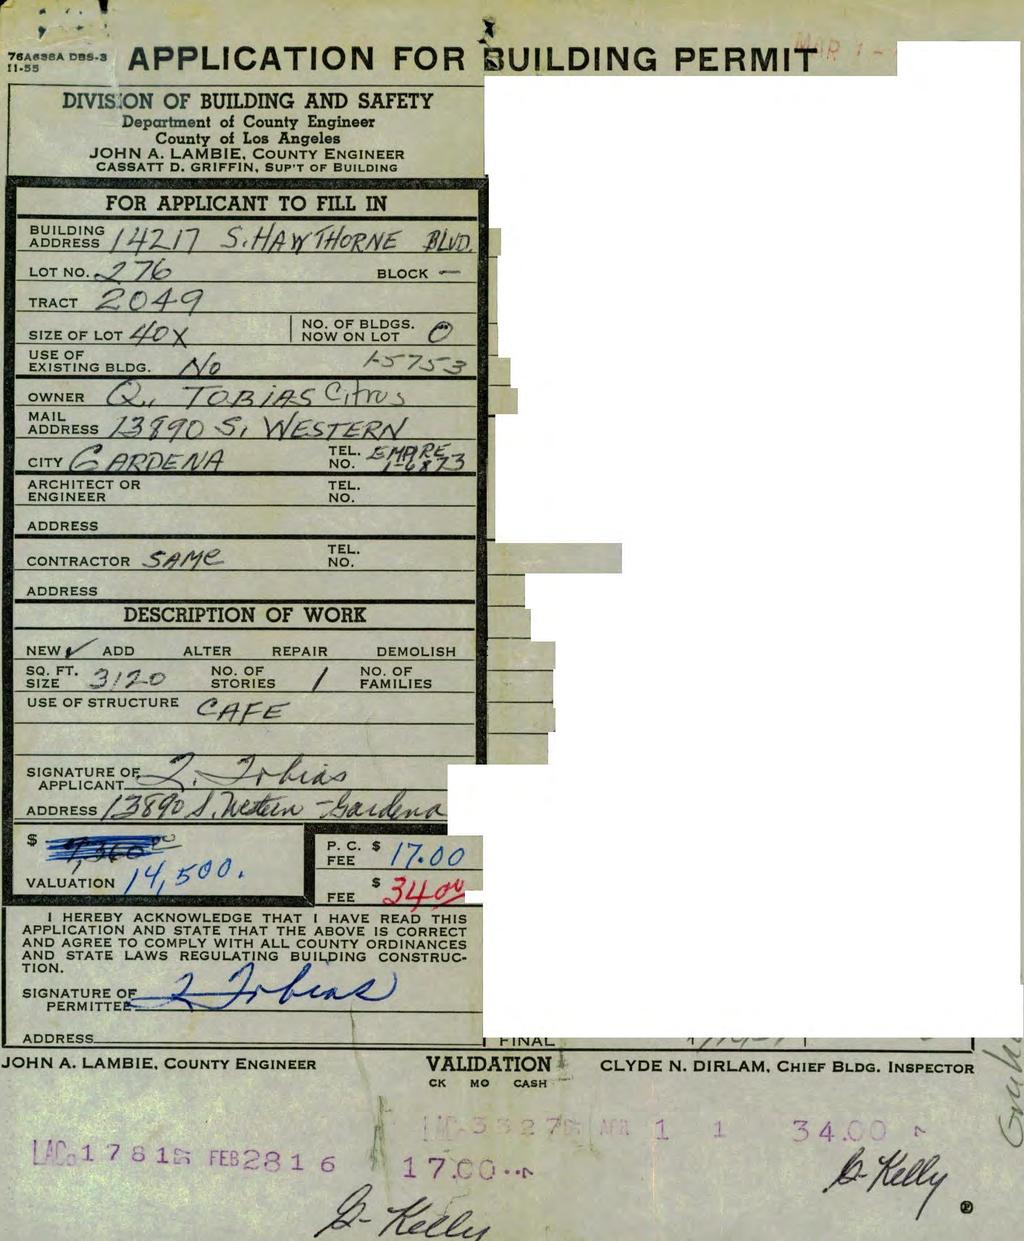 application for building permit DIVIS. ON OF AND SAFETY Department of County Engineer County of Los Angeles JOHN A. LAMBIE. COUNTY ENGINEER CASSATT D.